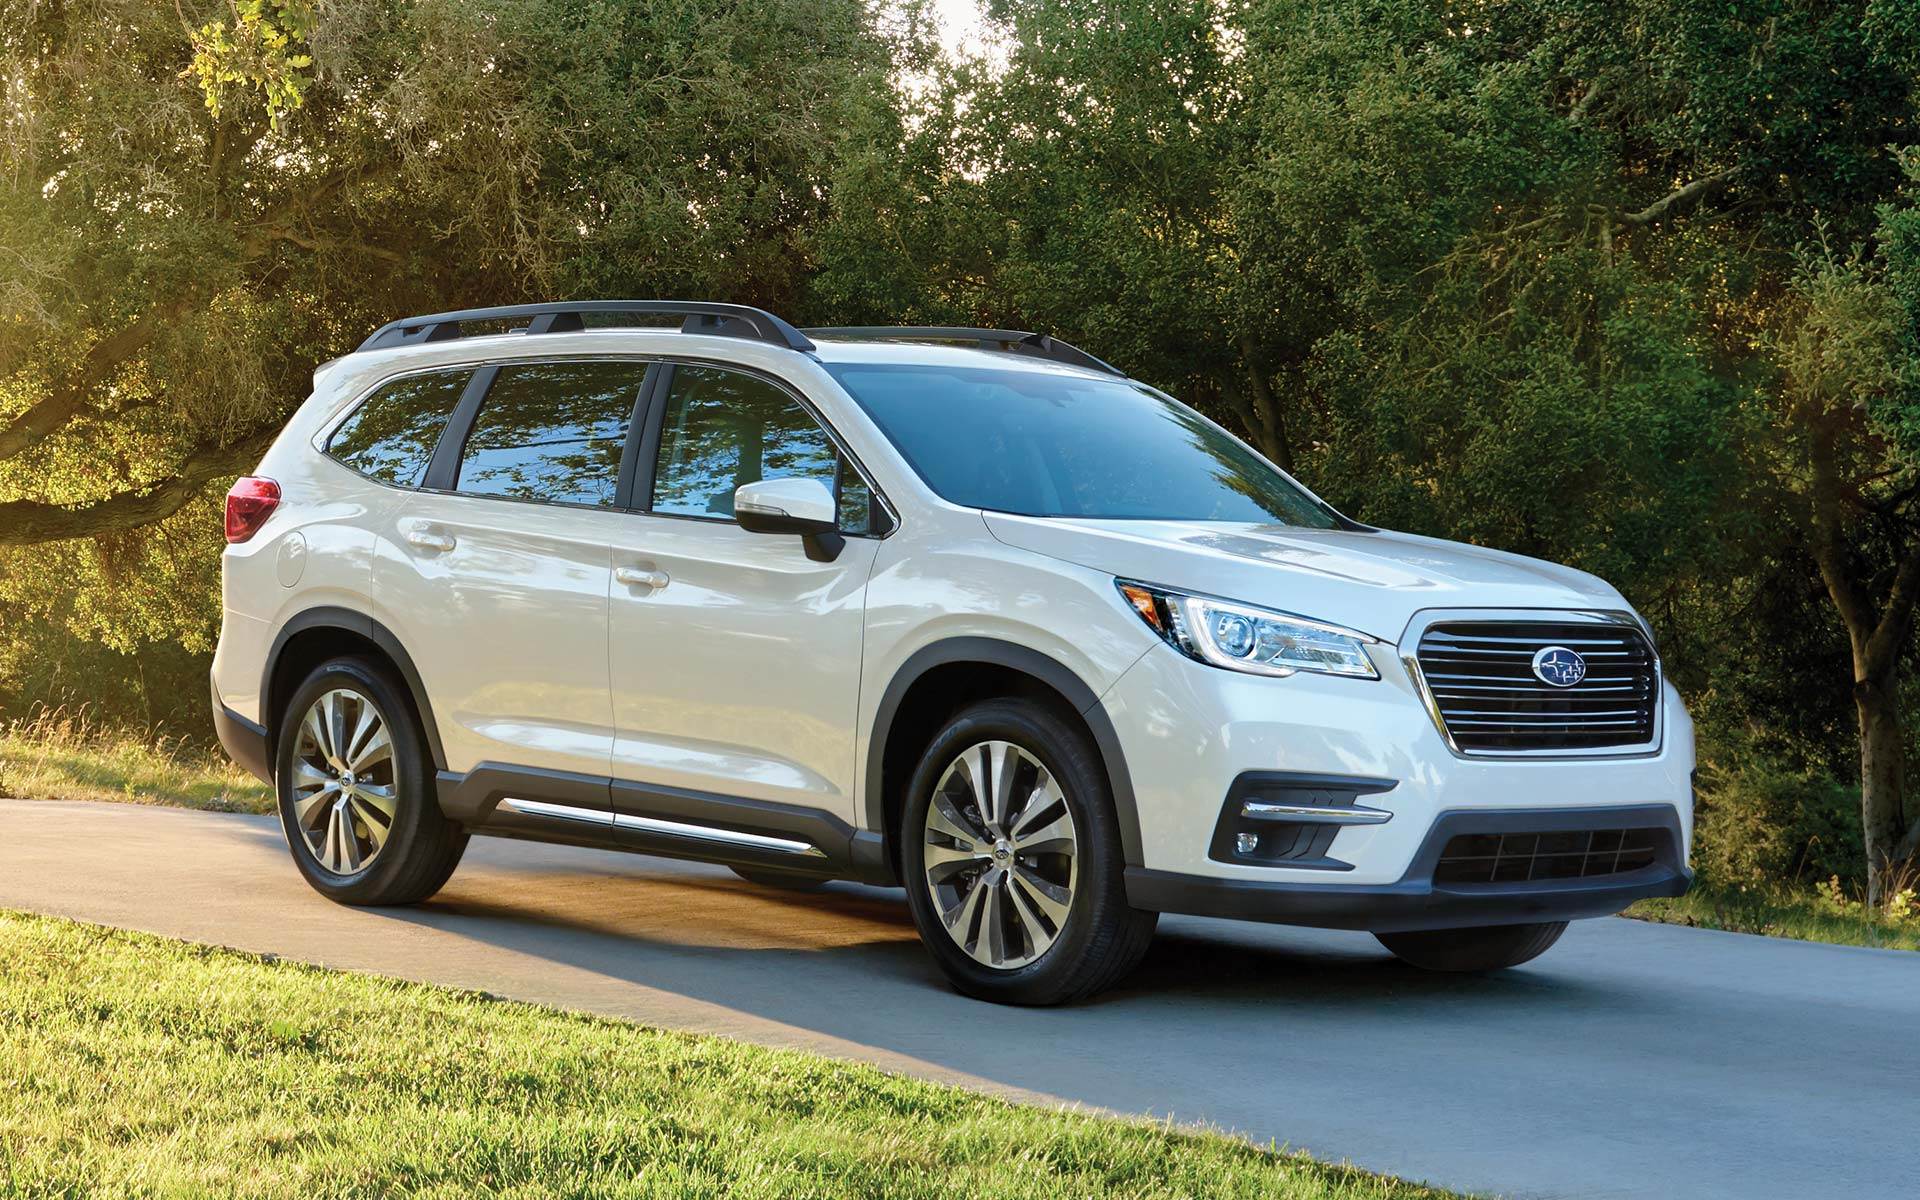 Spacious and Adventure Ready 2021 Subaru Ascent Available in Bay City, MI